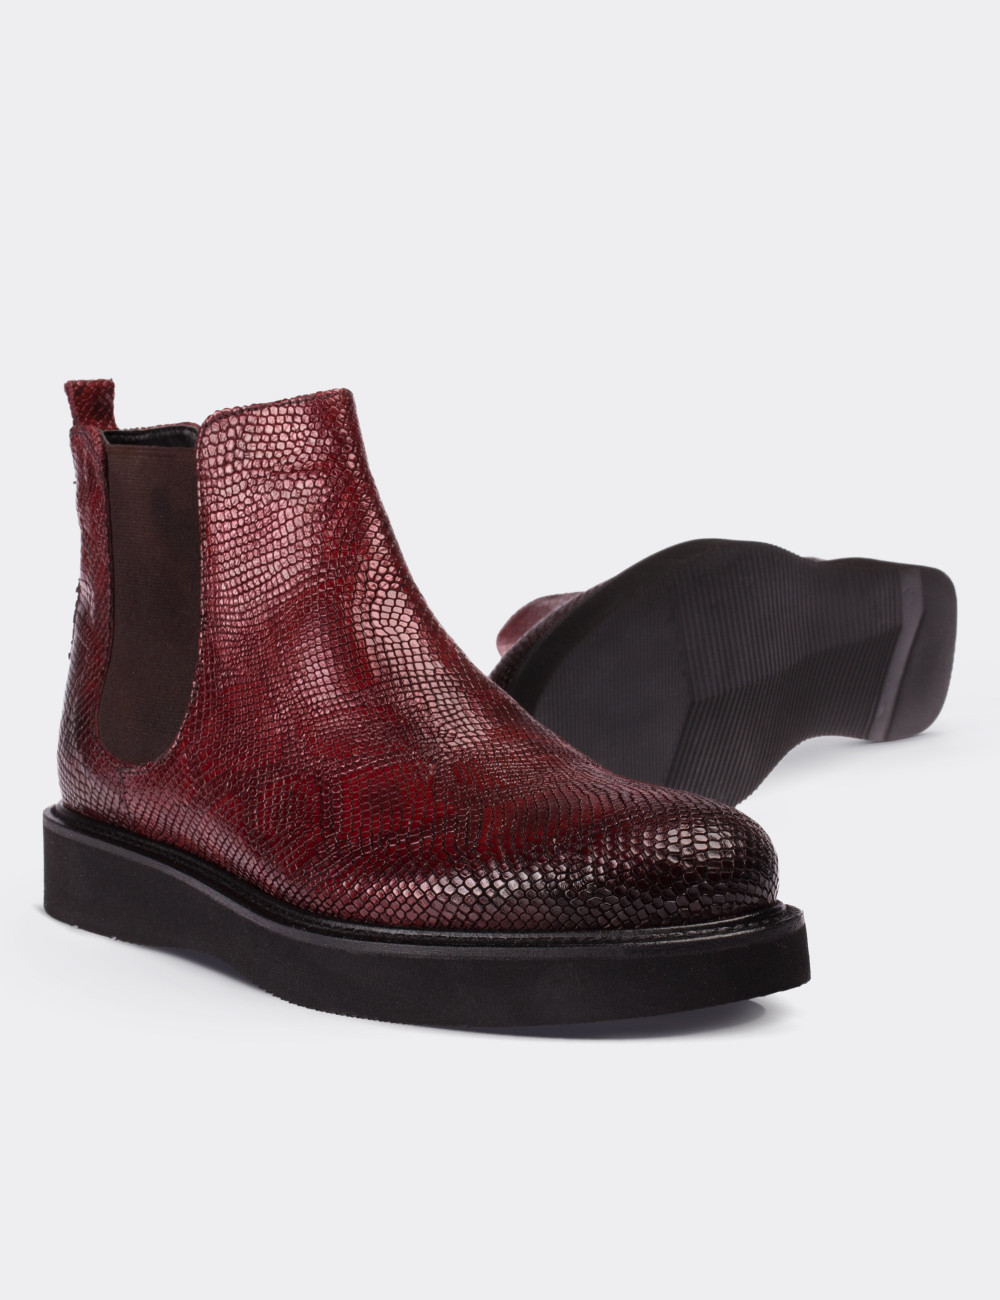 Burgundy  Leather Chelsea Boots - 01573ZBRDE01